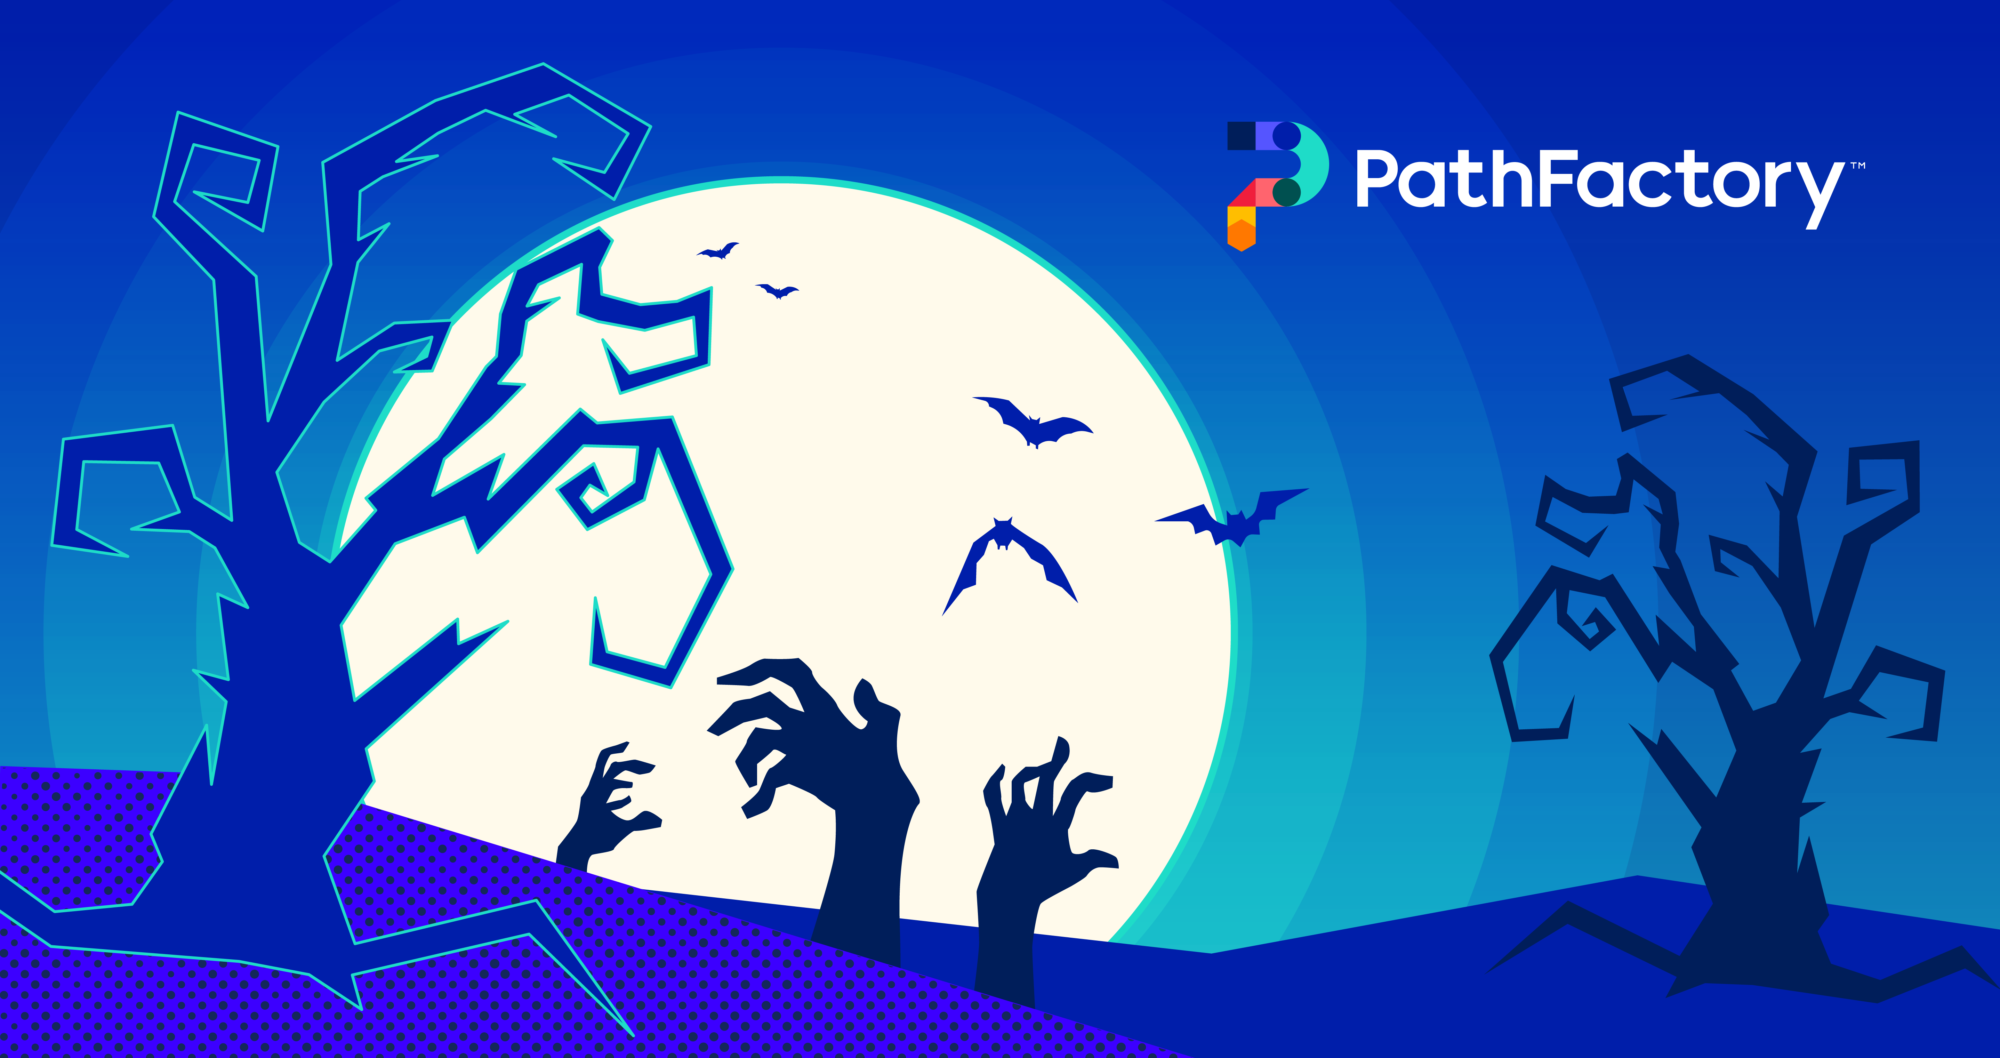 Header Image showing a spooky cartoon image with twisted trees and hand coming out of the ground with the moon in the background on a dark blue background. PathFactory's logo is on the top right.